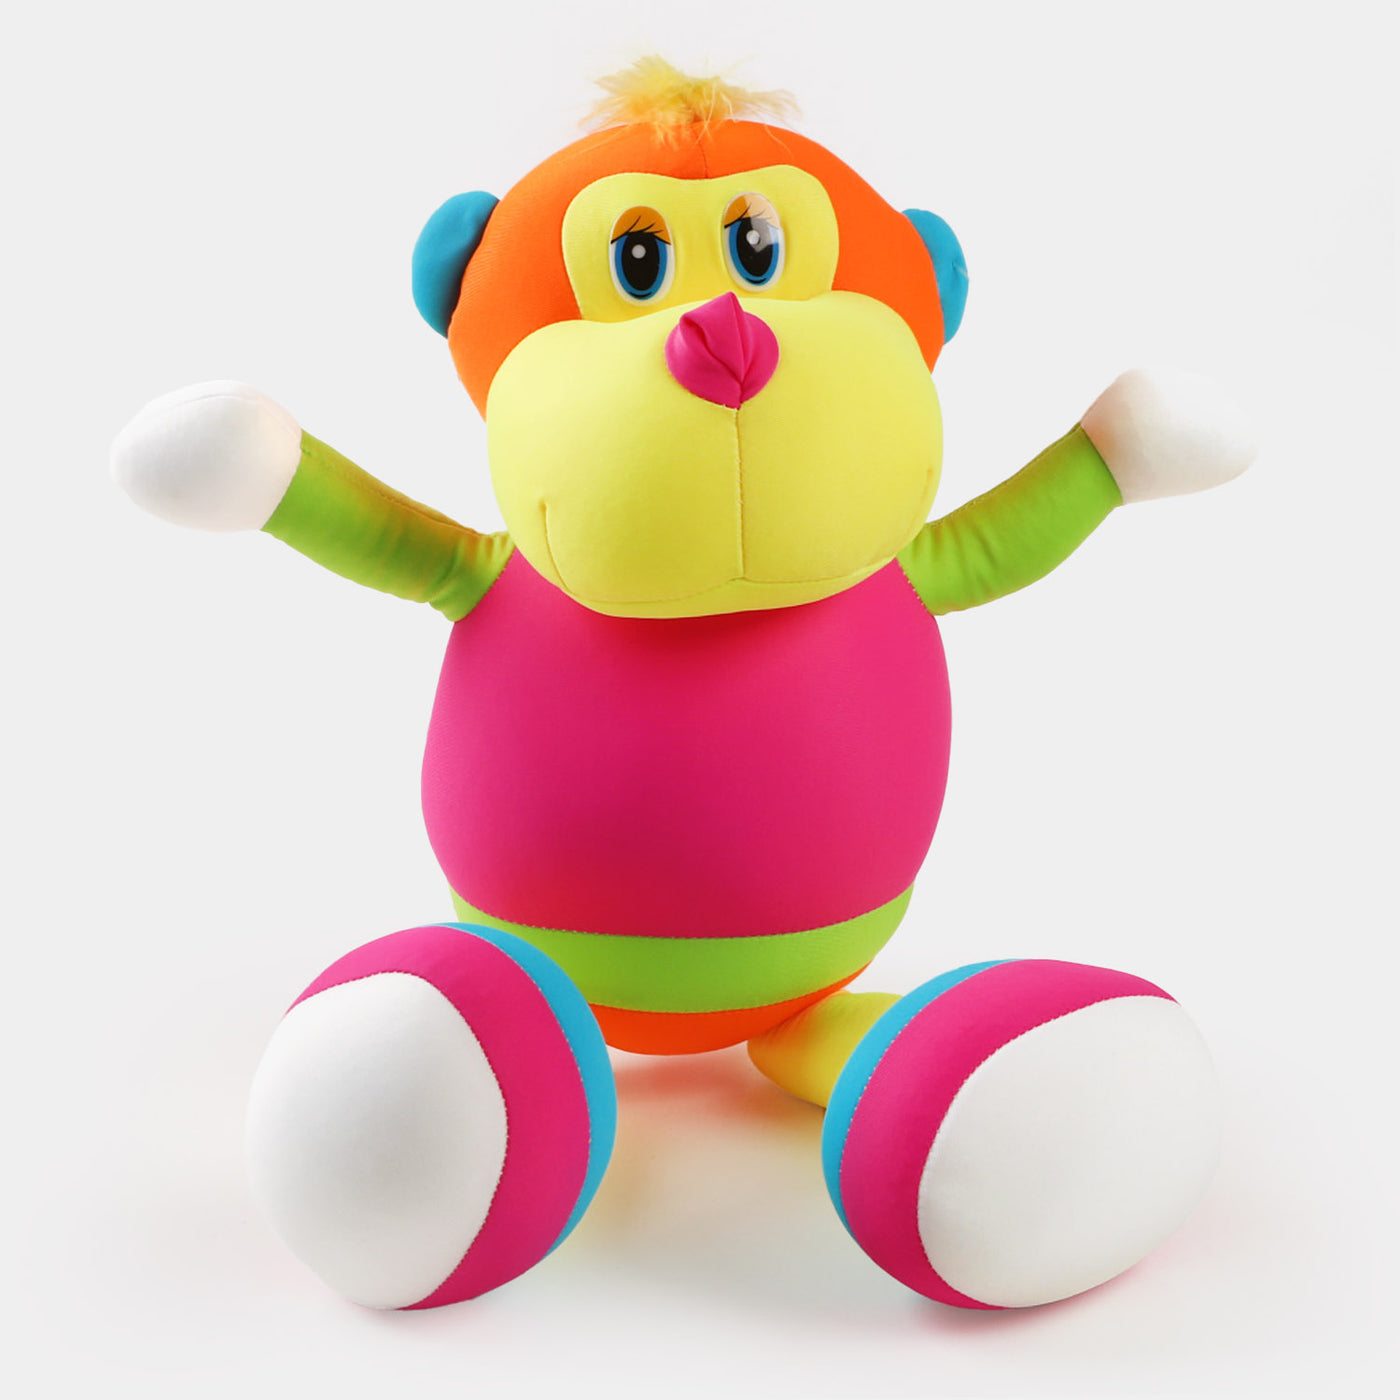 Soft Beans Monkey Toy For Kids - Multi